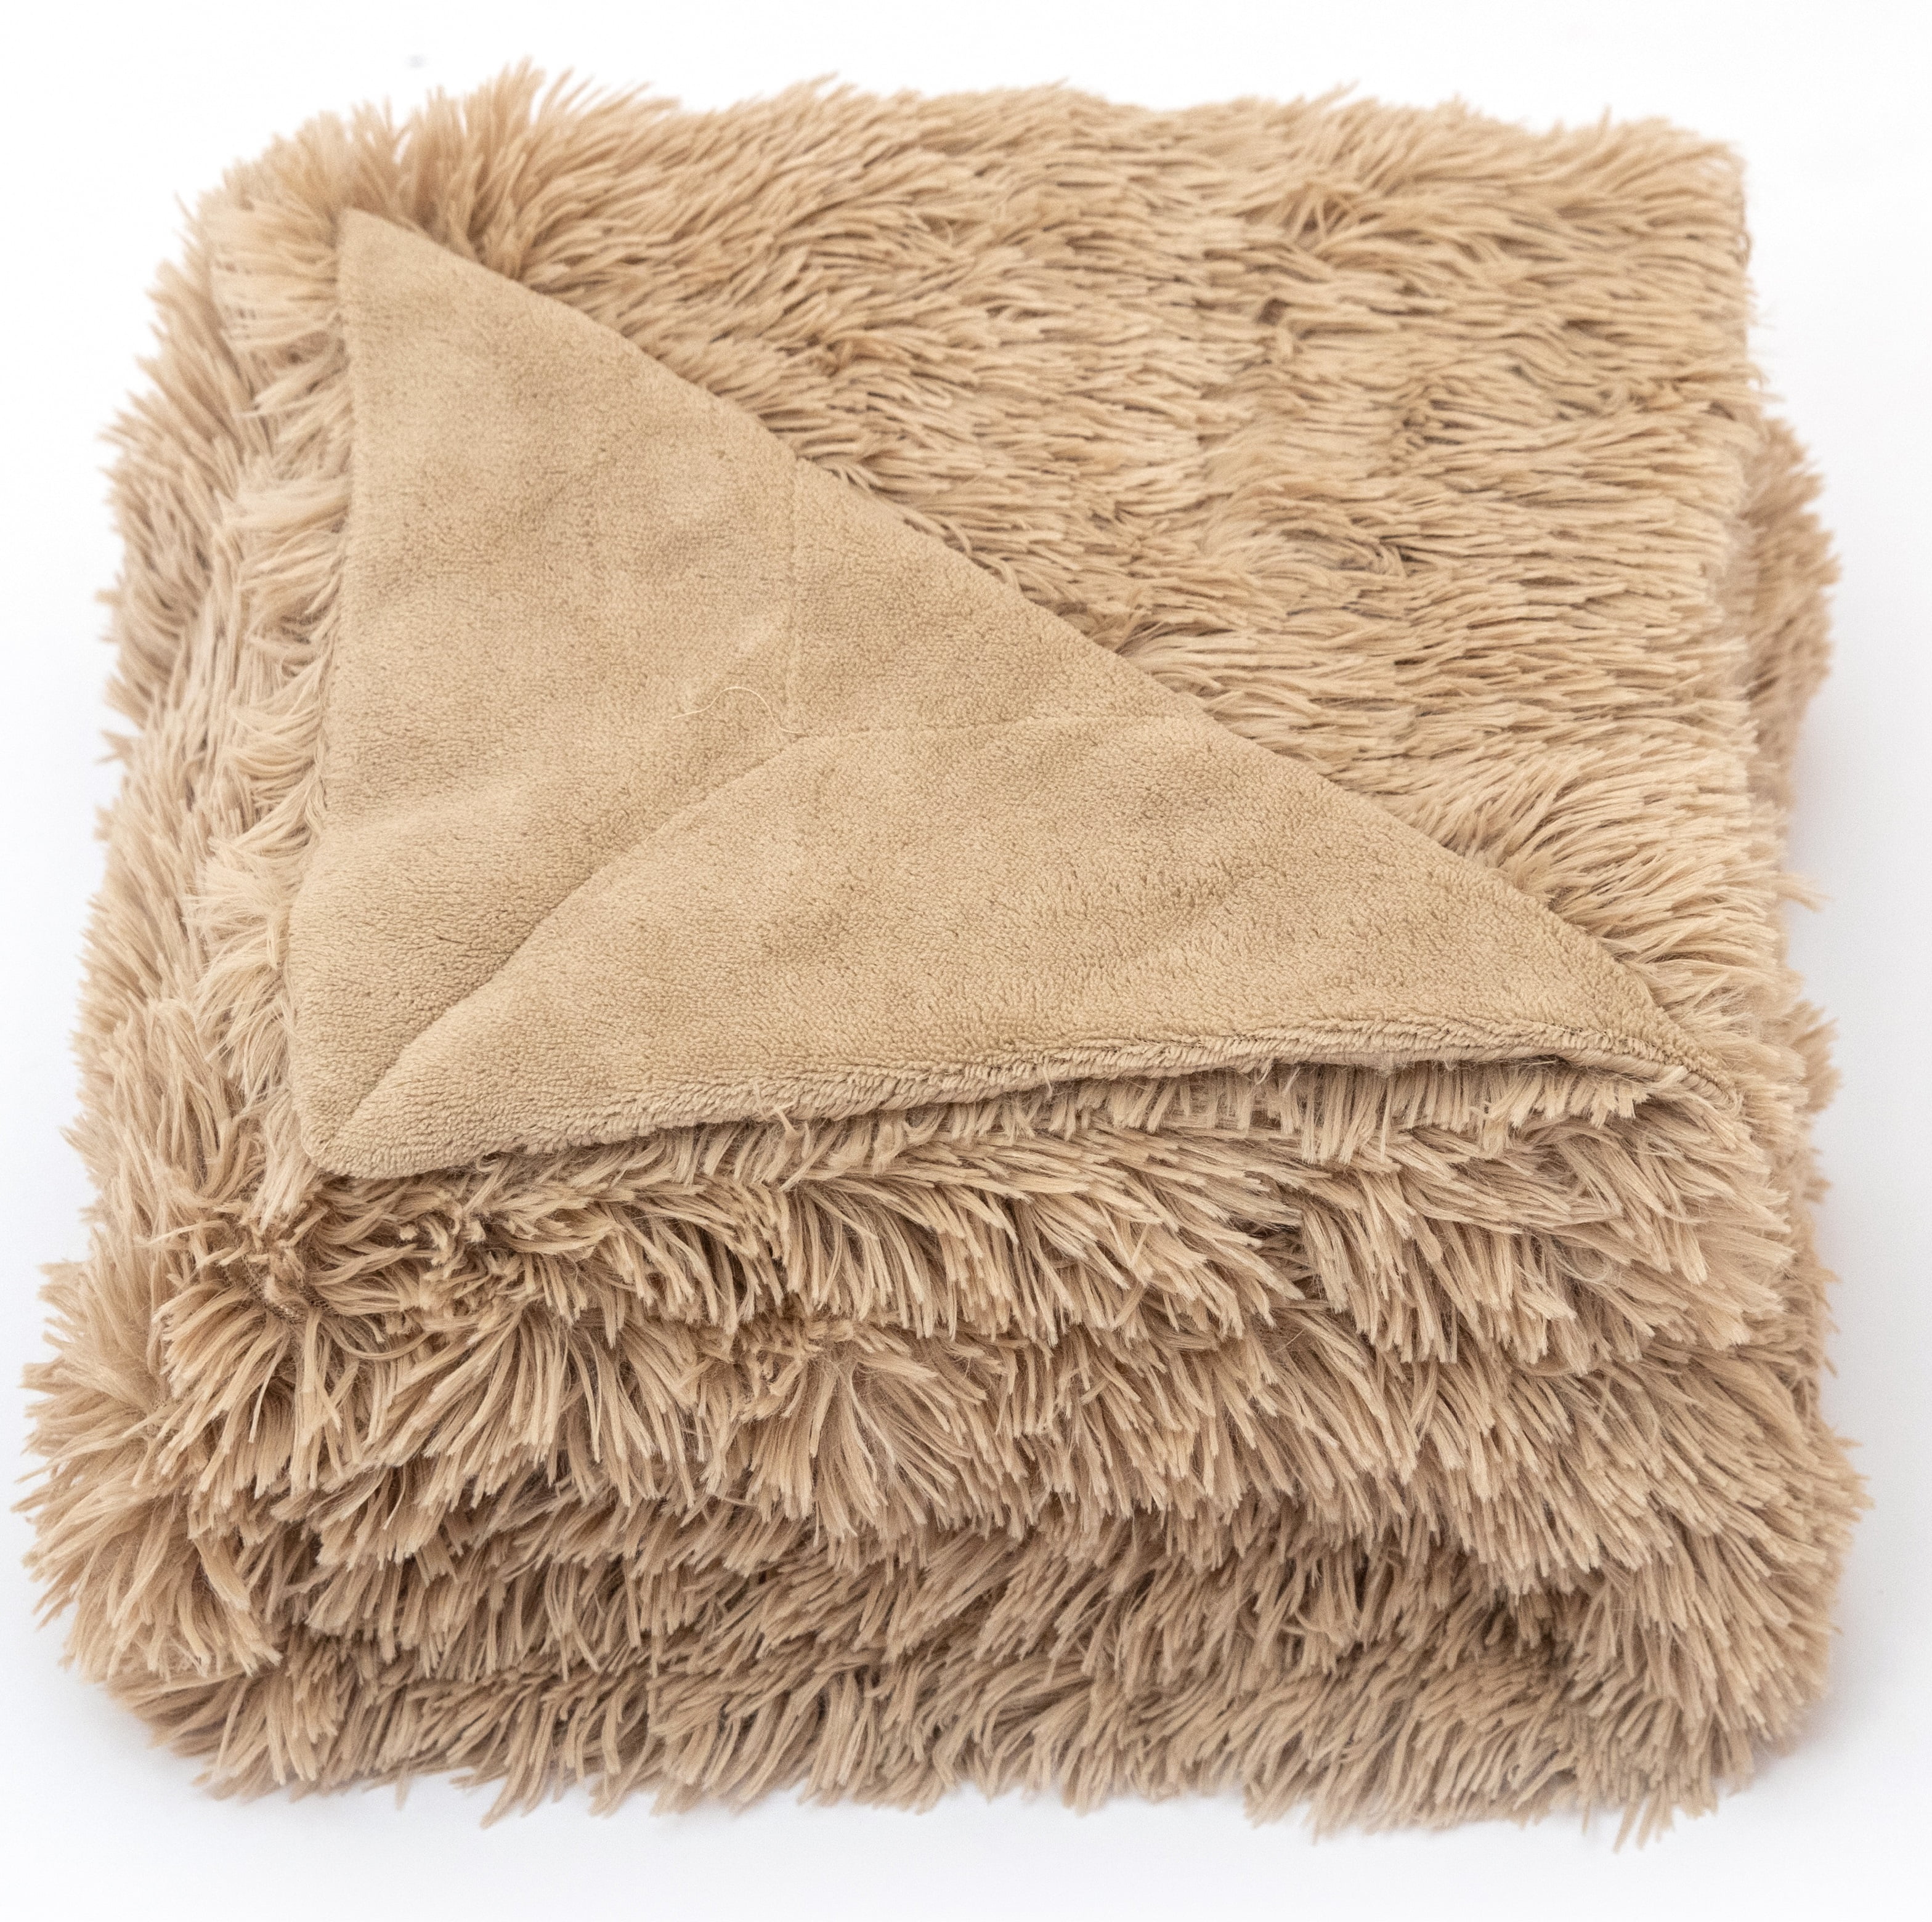 Cheer Collection Soft and Furry Long Shaggy Hair Throw Blanket 